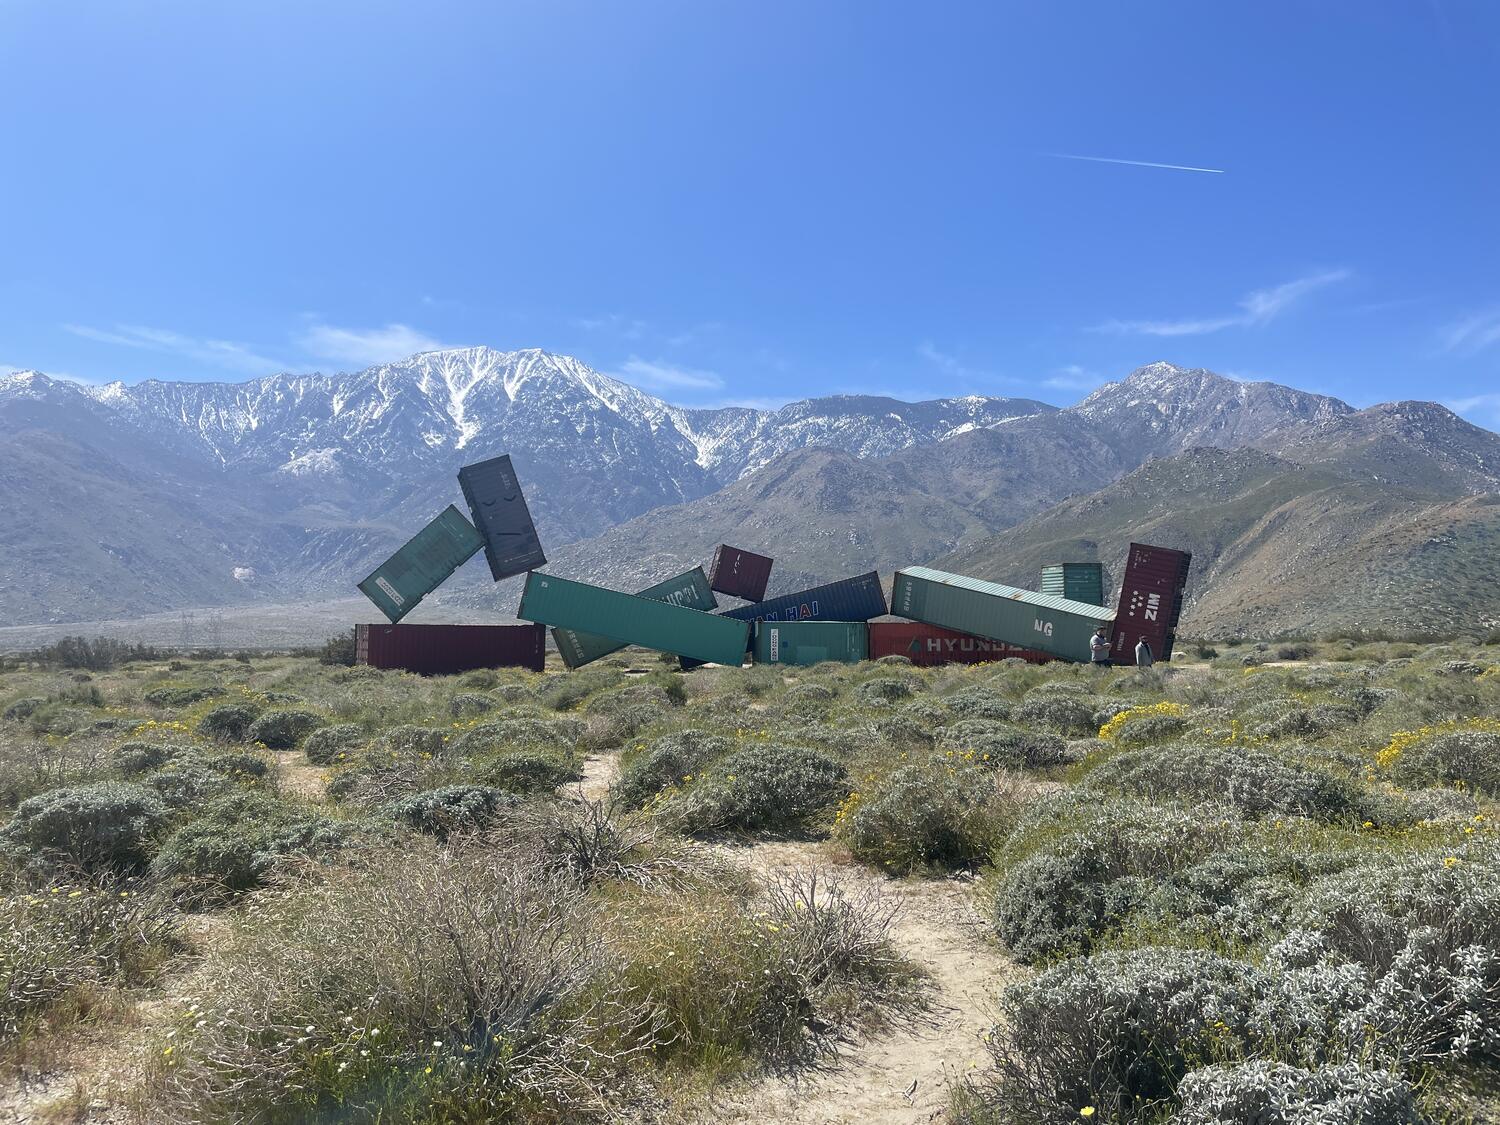 A collection of storage containers, positioned in the form of a reclining person, set in the desert against the mountains